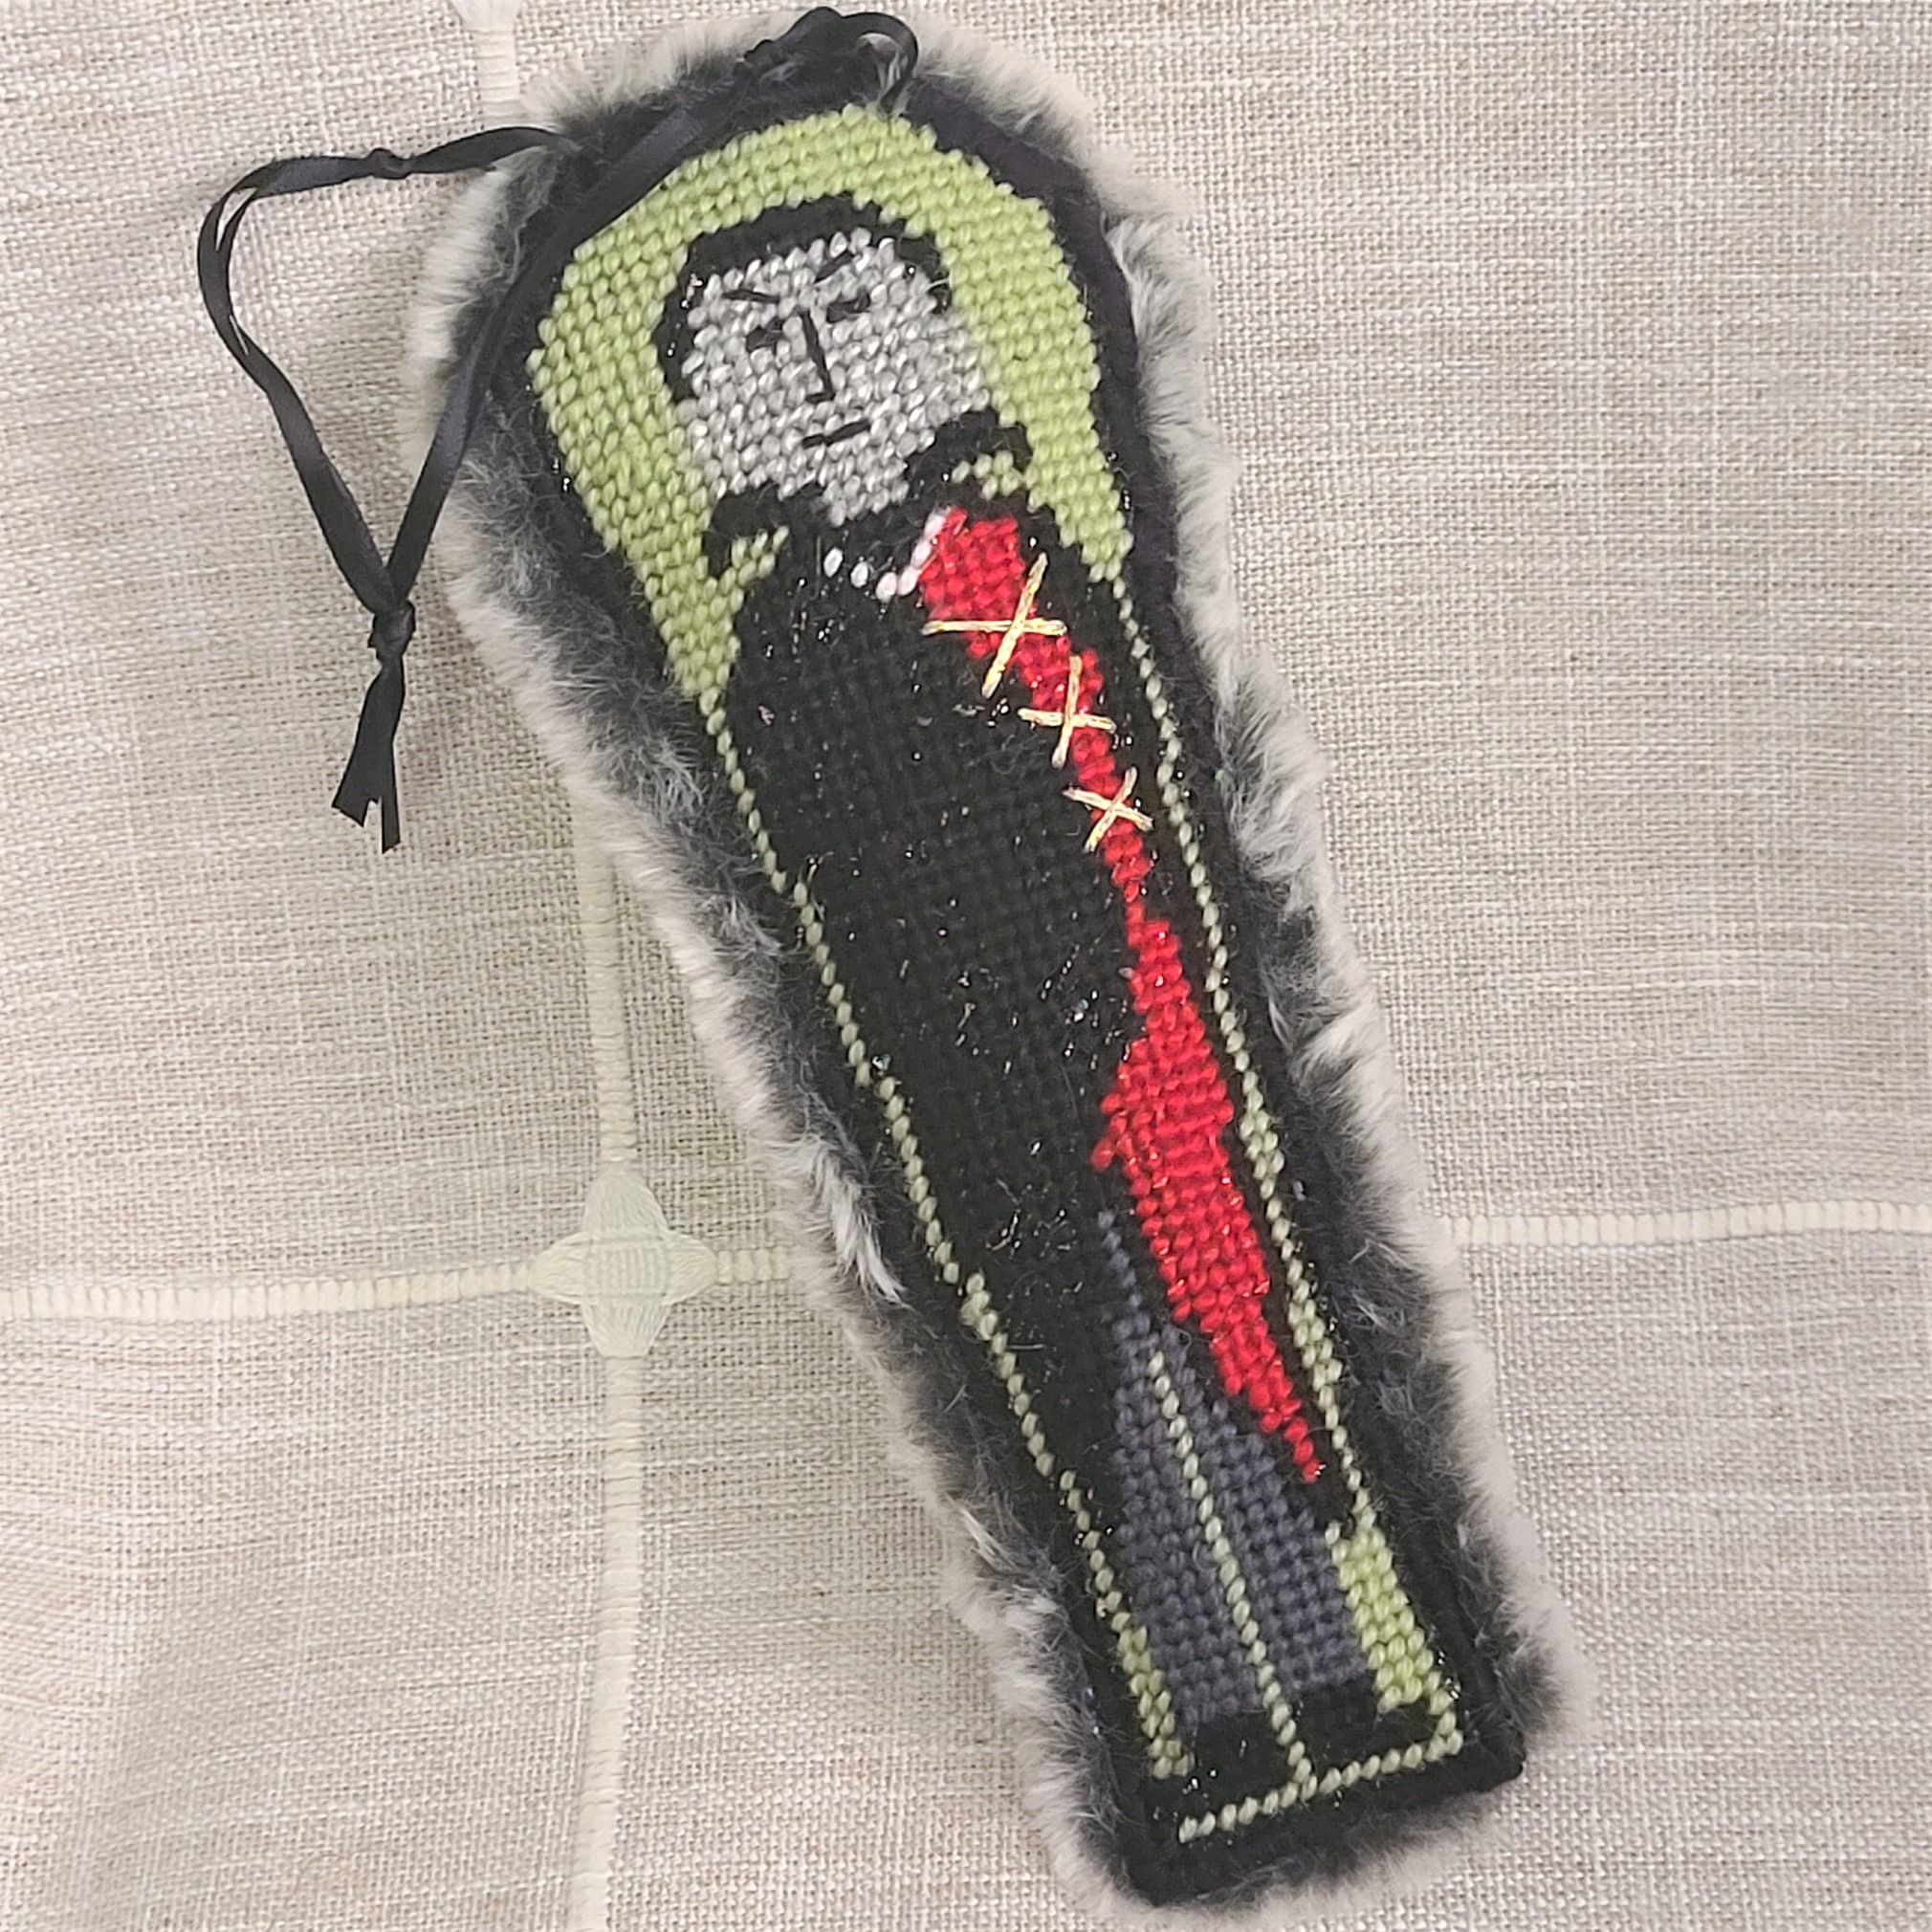 Halloween needlepoint Dracula in the coffin ornament